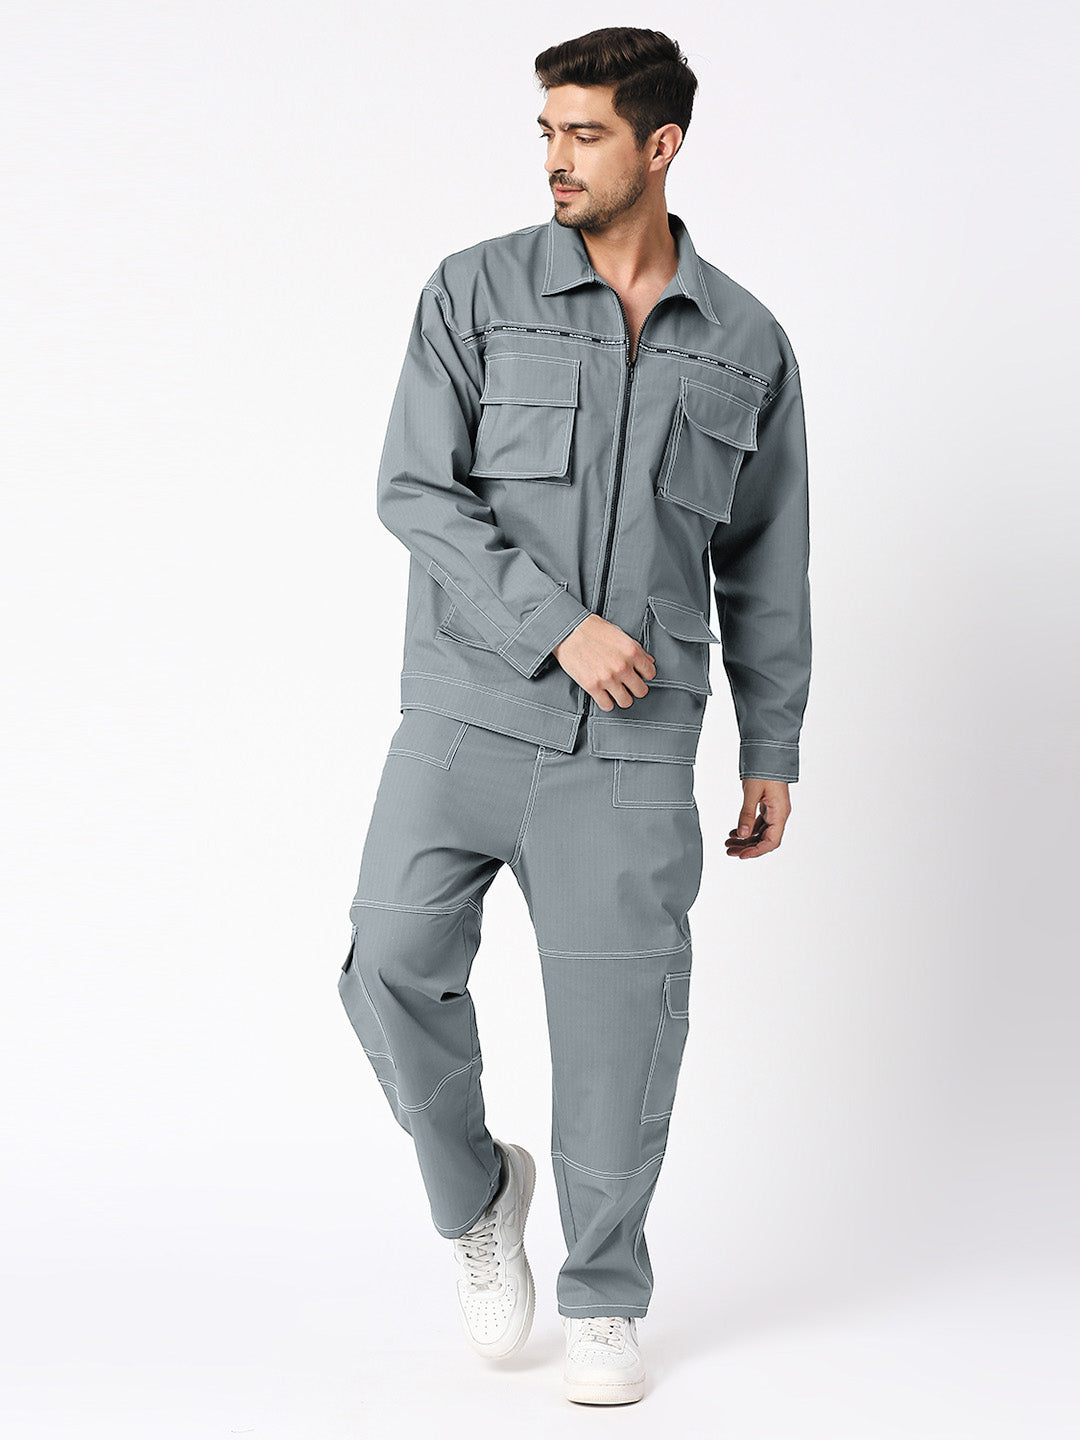 Cargo Style Jacket With Pant Grey Color Co-Ord Set